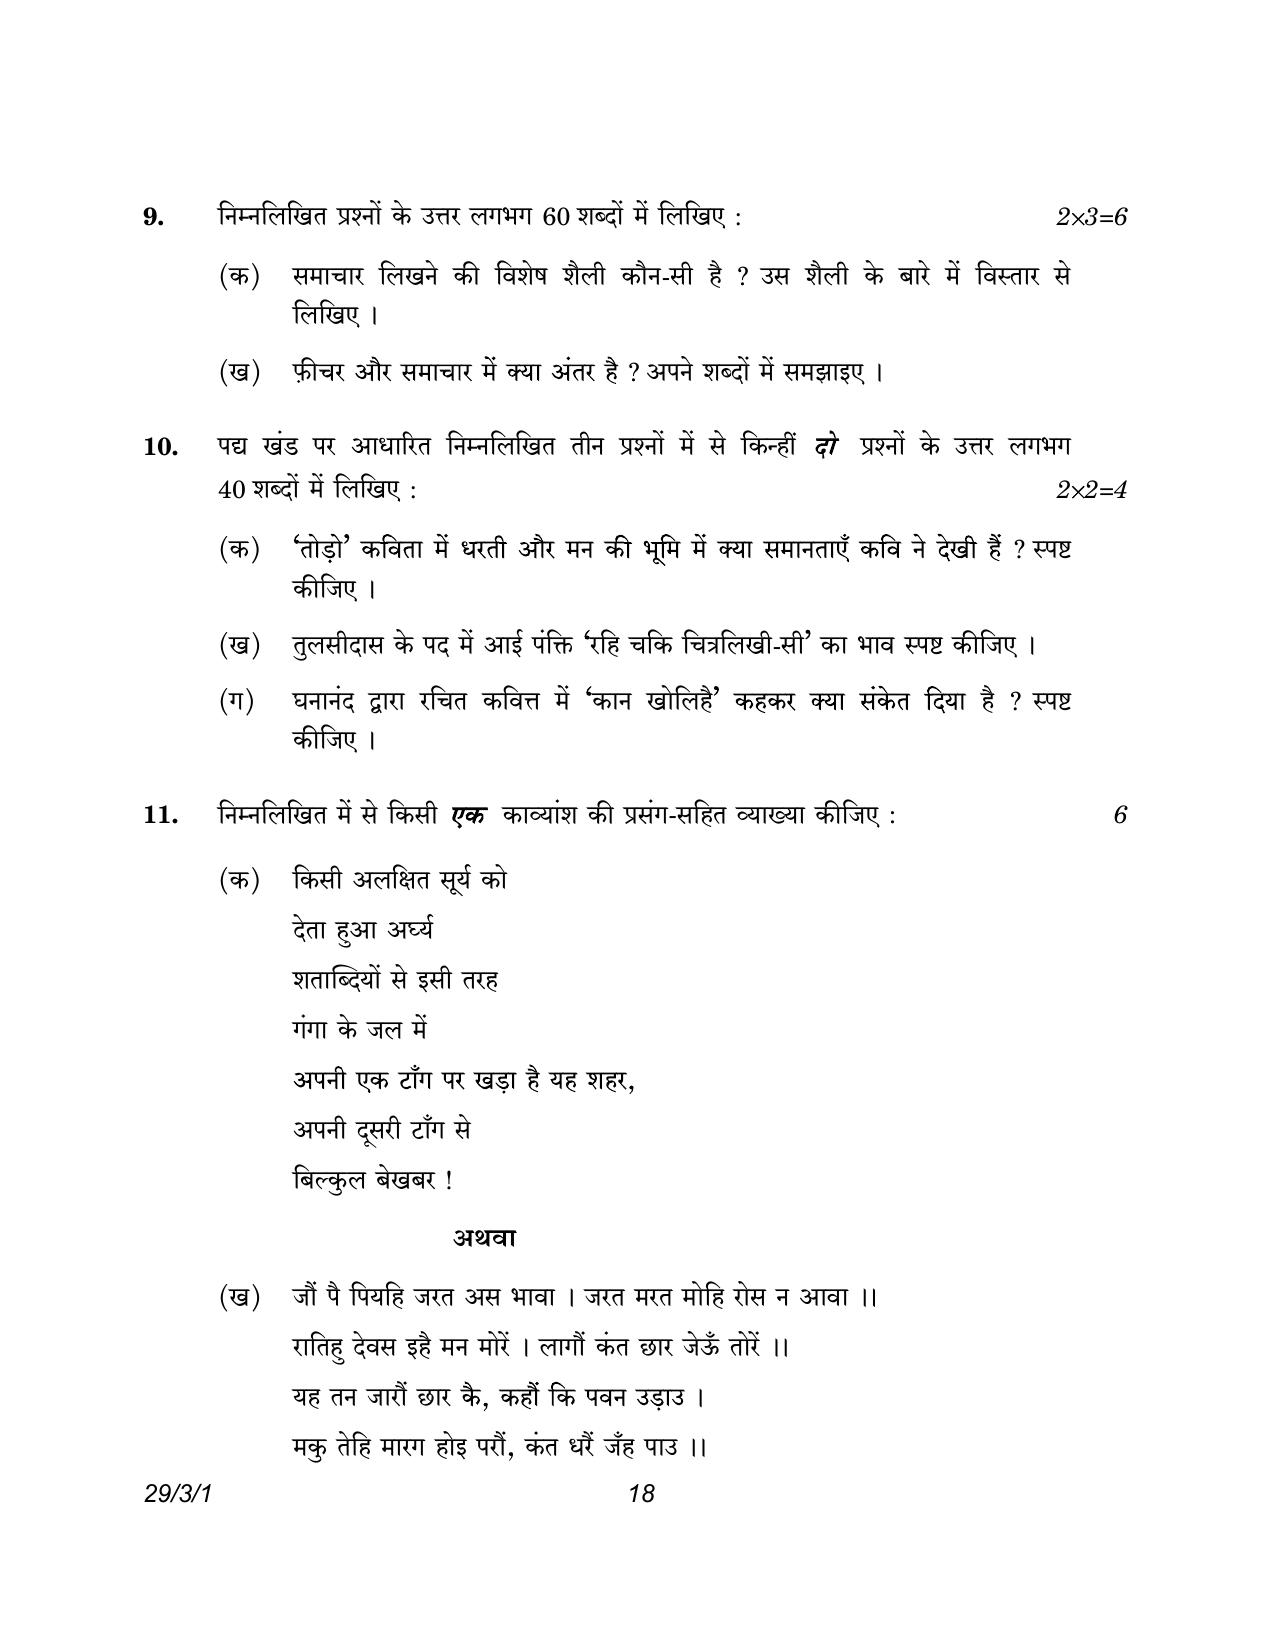 CBSE Class 12 29-3-1 Hindi Elective 2023 Question Paper - Page 18